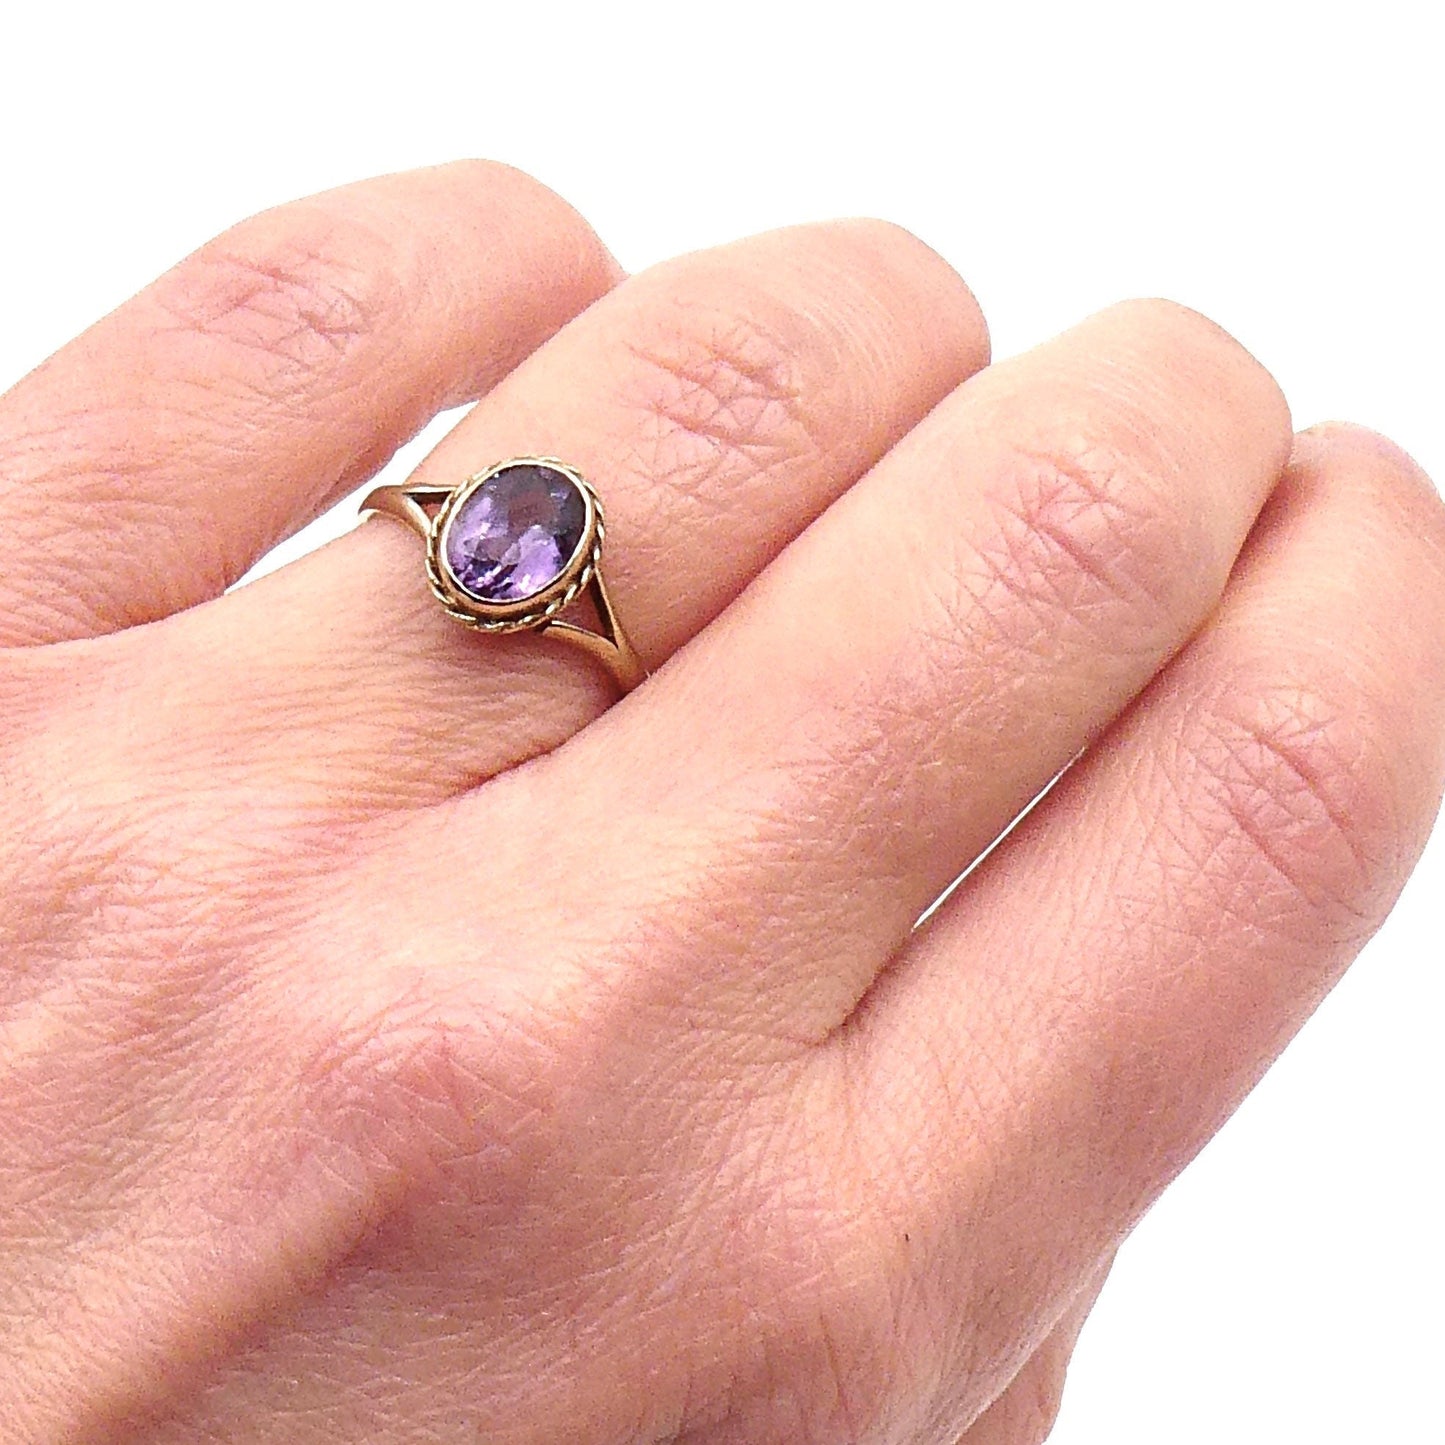 Amethyst ring, with a faceted amethyst in a 9kt gold setting, February birthstone ring. - Collected